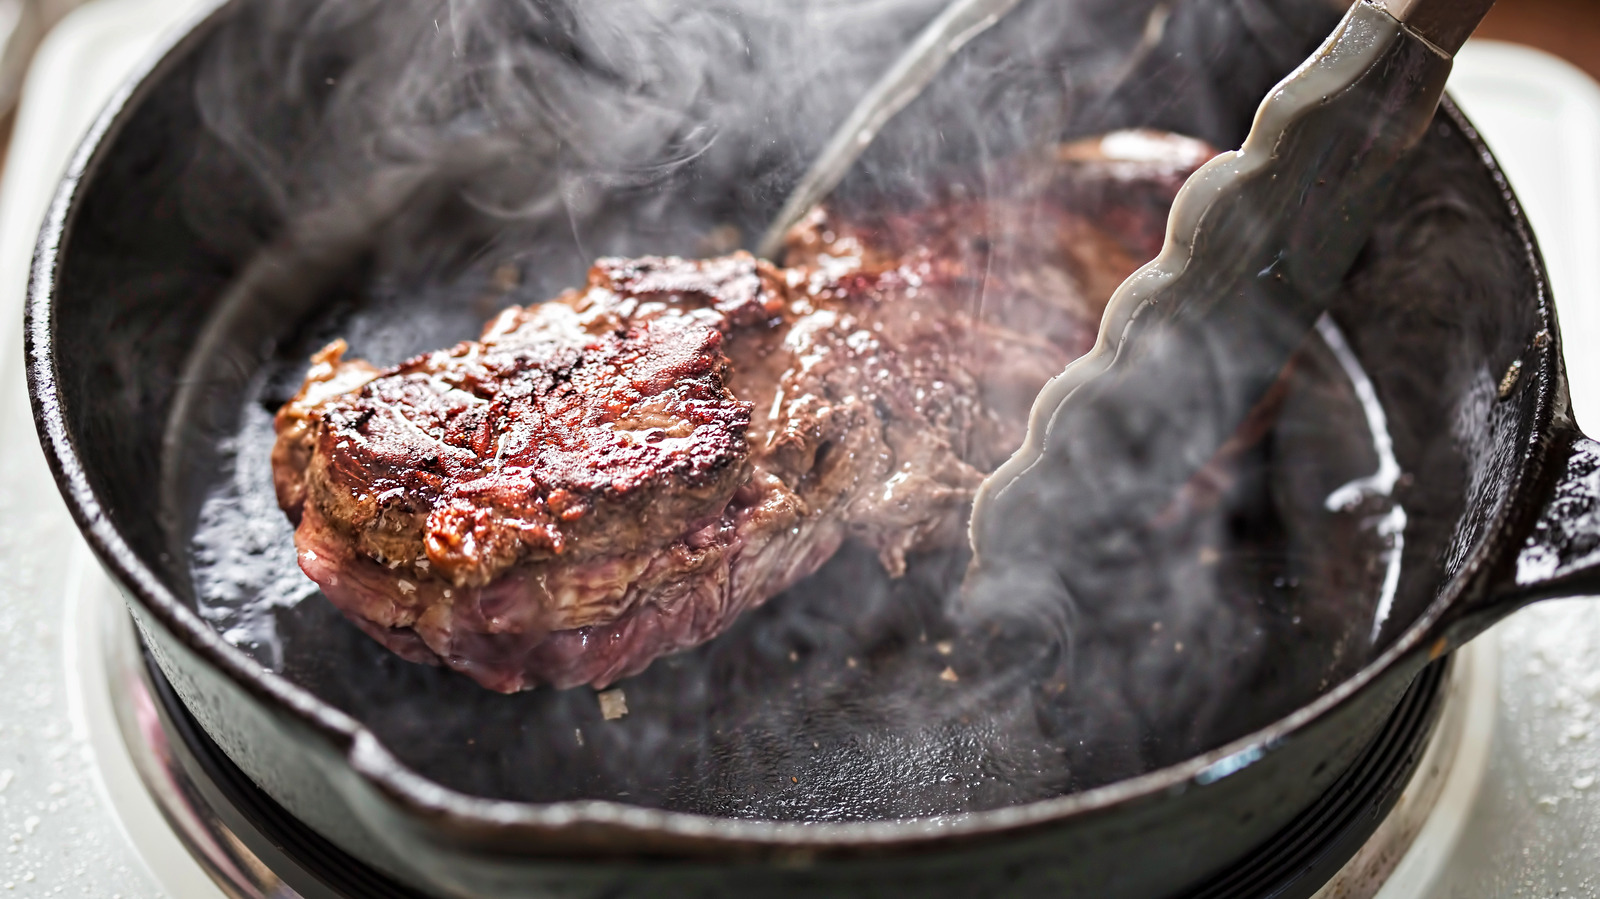 https://www.tastingtable.com/img/gallery/is-it-possible-to-over-season-a-cast-iron-pan/l-intro-1652208135.jpg